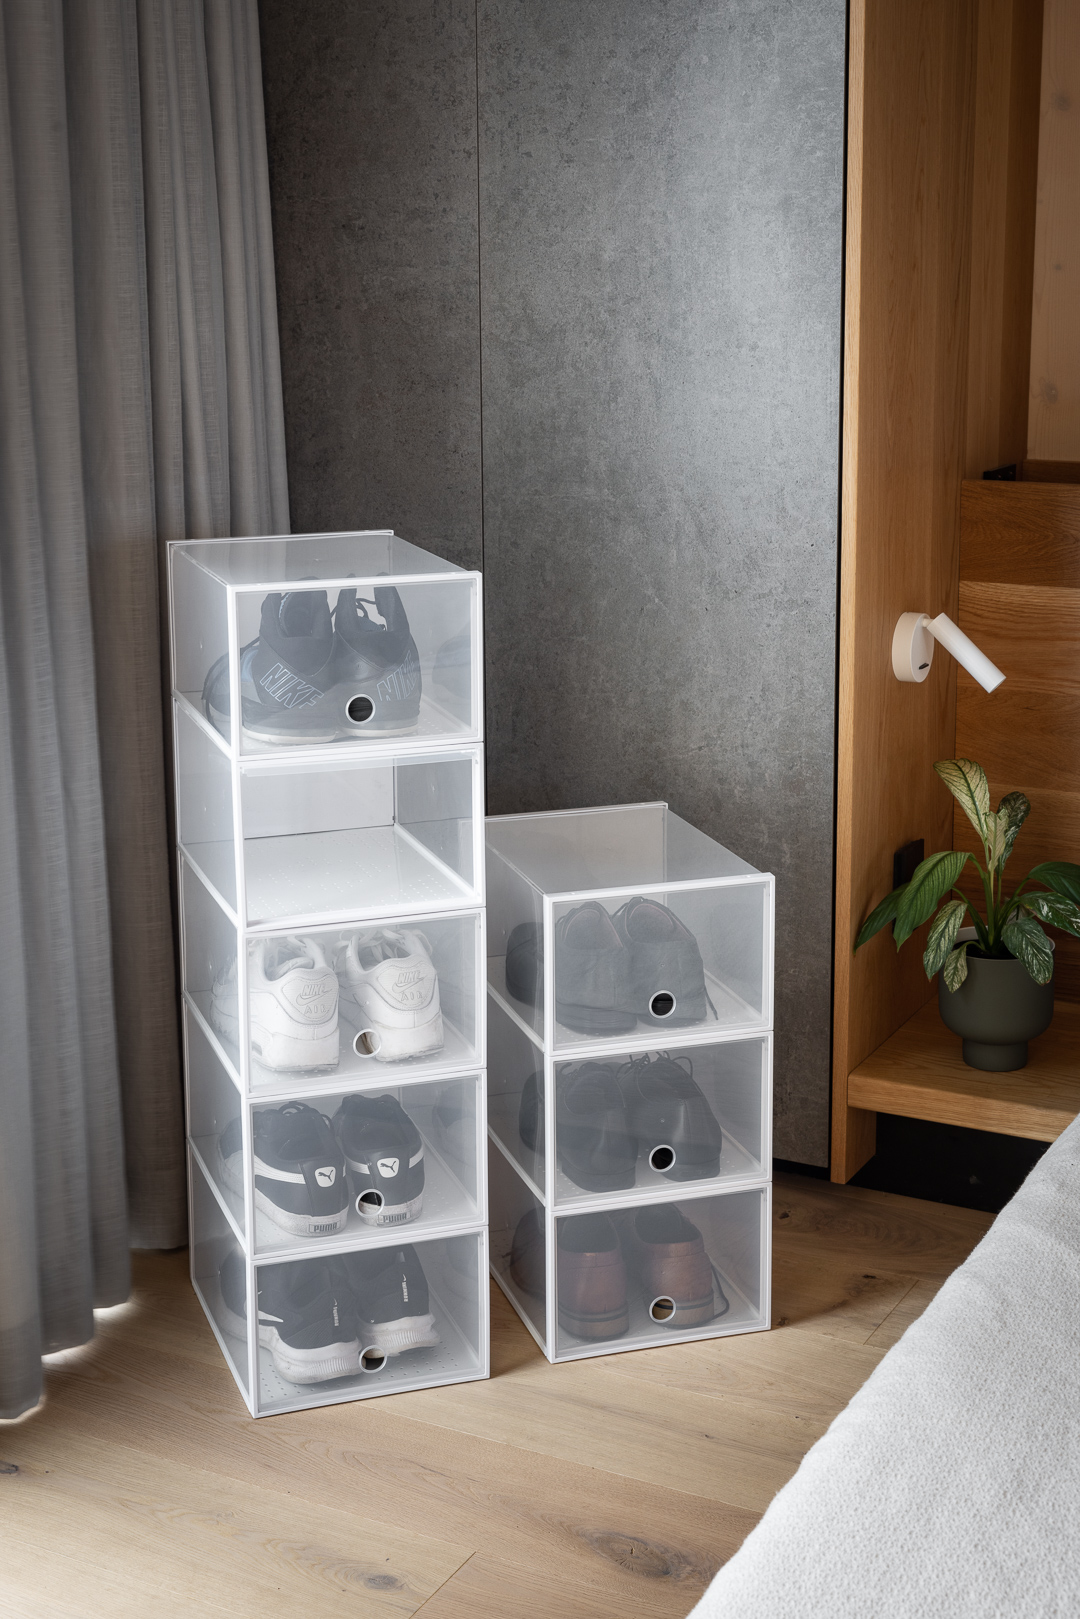 Stackable Storage Ideas Stackable storage is an efficient way of organising your items, while still allowing you to make the most of the space you have to work with - big or small. Read on to learn about the benefits of stackable storage and how you can implement it in your home. Space Efficiency Stackable storage is designed to maximise vertical space. By stacking containers or bins, you can make the most of limited floor space, which is particularly useful in smaller bedrooms or living areas. Try organising your excess shoes or accessories using our Stackable Shoe Boxes. Made from a transparent material to easily grab-and-go, these shoe boxes will save space with their multi-layered stacking function. Organisation Stacking storage containers helps to keep things organised. We love our classic Modular Containers as they’re a versatile and stylish storage solution, available in contemporary colours to compliment the style of any home. You can designate specific items to each container, and by stacking them, you create a neat and orderly storage system. The adaptability of Modular Containers means that you can use them in any room in the house. Flexibility Whether you are storing clothes, toiletries, office supplies, or tools, there are stackable solutions available to suit your requirements. Stackable storage solutions are often modular, allowing you to customise your storage space based on your needs. With nine sizes available, our Stackable Organisers are completely customisable, allowing you to mix and match different sizes to create a flexible and adaptable storage system. Accessibility Stacking allows for easy access to items. You can quickly identify and retrieve items from the top of the stack without having to move everything around. This is advantageous when you need frequent access to stored items. To avoid losing track of what is inside each container, pop into your local Bunnings, pick up our QR Stickers and download the Organise by Inabox app. This is a really handy tool for logging and locating all of your stored items. Transportation When moving or rearranging items, stackable storage is convenient. Containers can be easily lifted and moved together, reducing the effort required for transporting items from one place to another. Our Stackable Crates are made from a tough, flexible plastic which is perfect for heavy-duty items. The crates are stackable without needing lids and nestable for compact storage when not in use. They also feature an easy lift and grip handle making transportation a breeze! For more storage tips, tricks and ideas, visit our blog or follow us on Instagram, Facebook and Pinterest. 